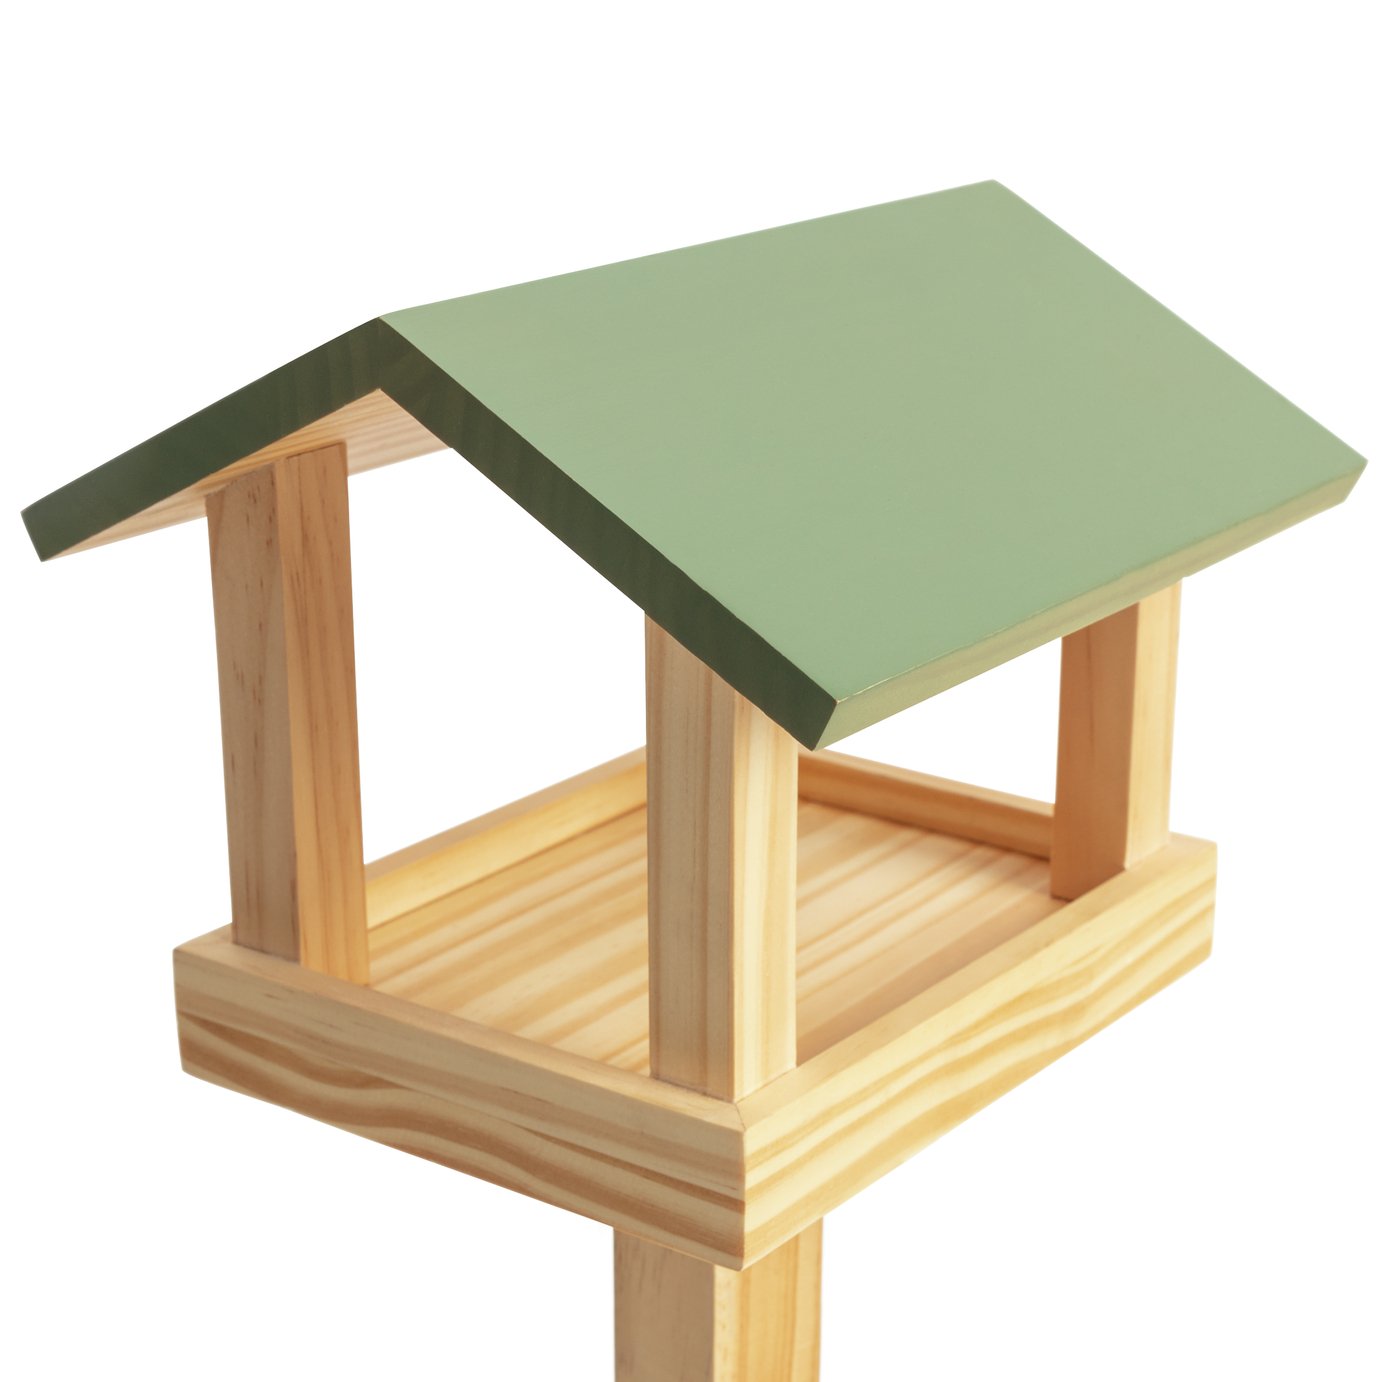 Image of Save Over &pound23.00: Wooden Bird Feeding Table